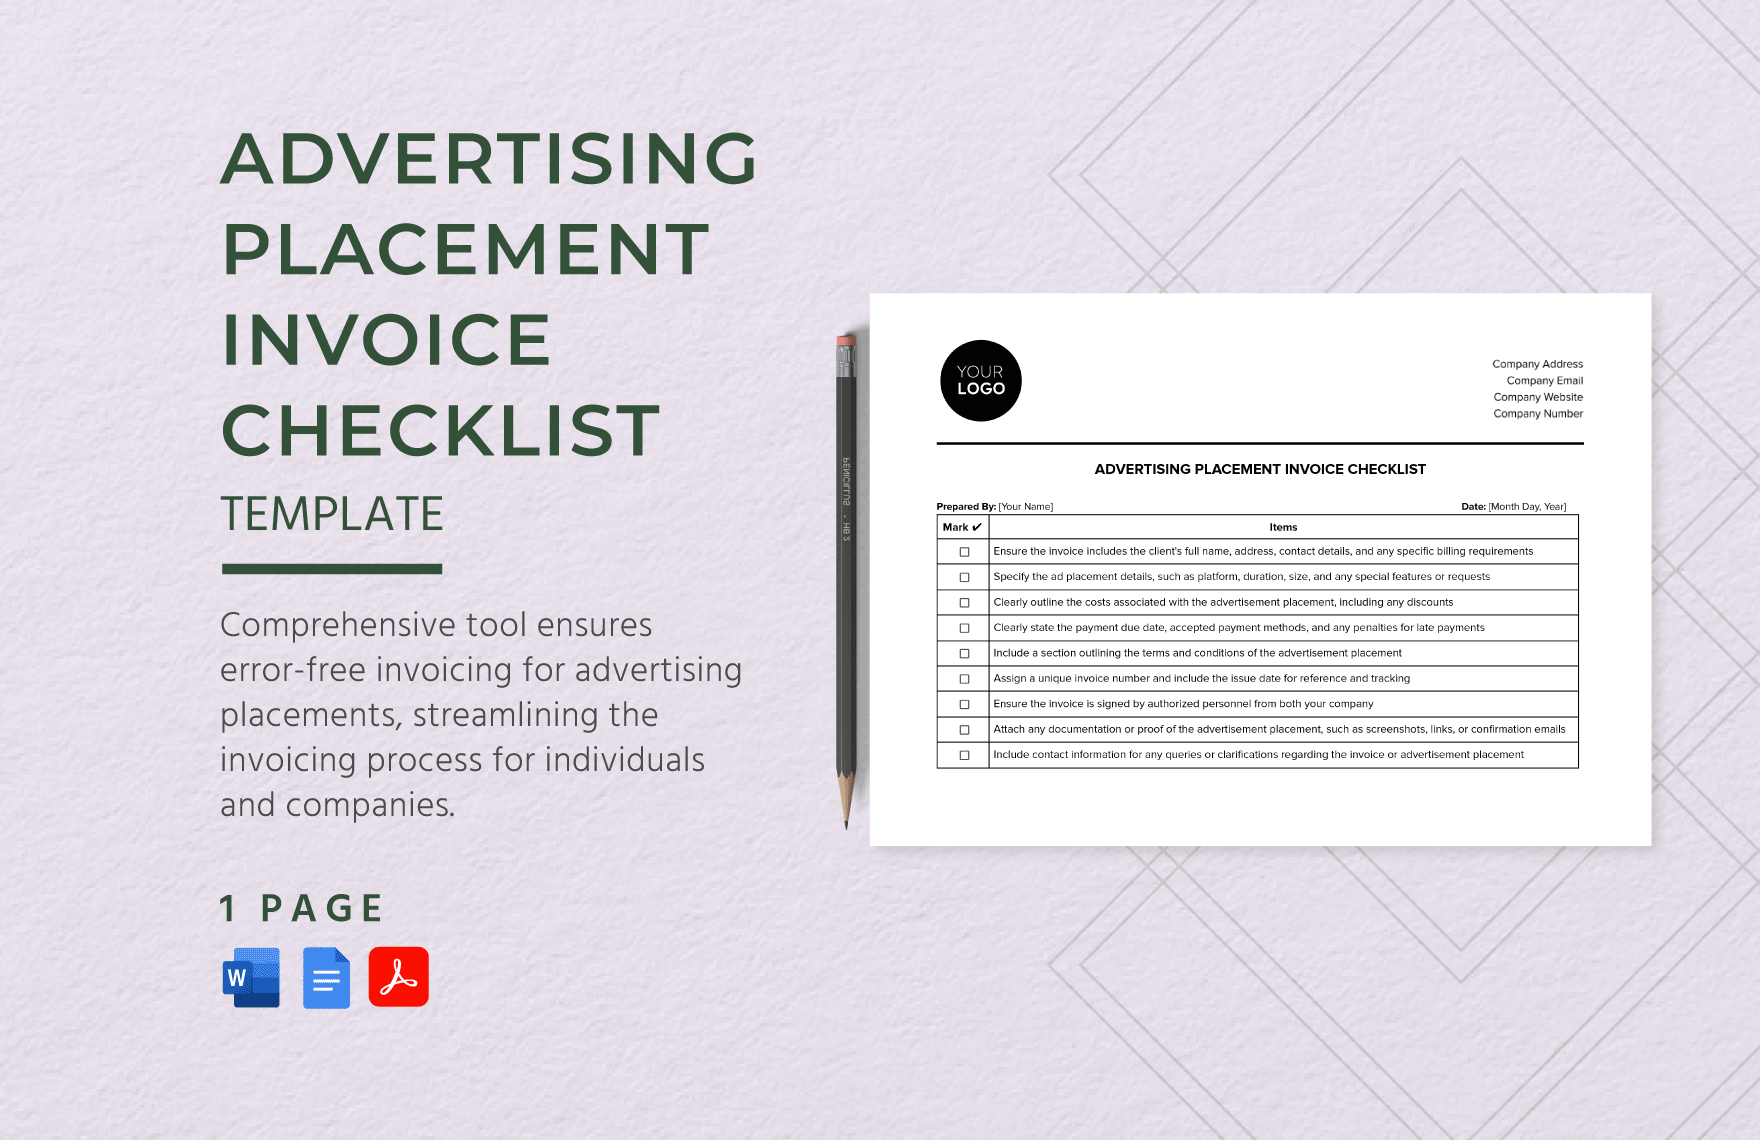 Advertising Placement Invoice Checklist Template in Word, Google Docs, PDF